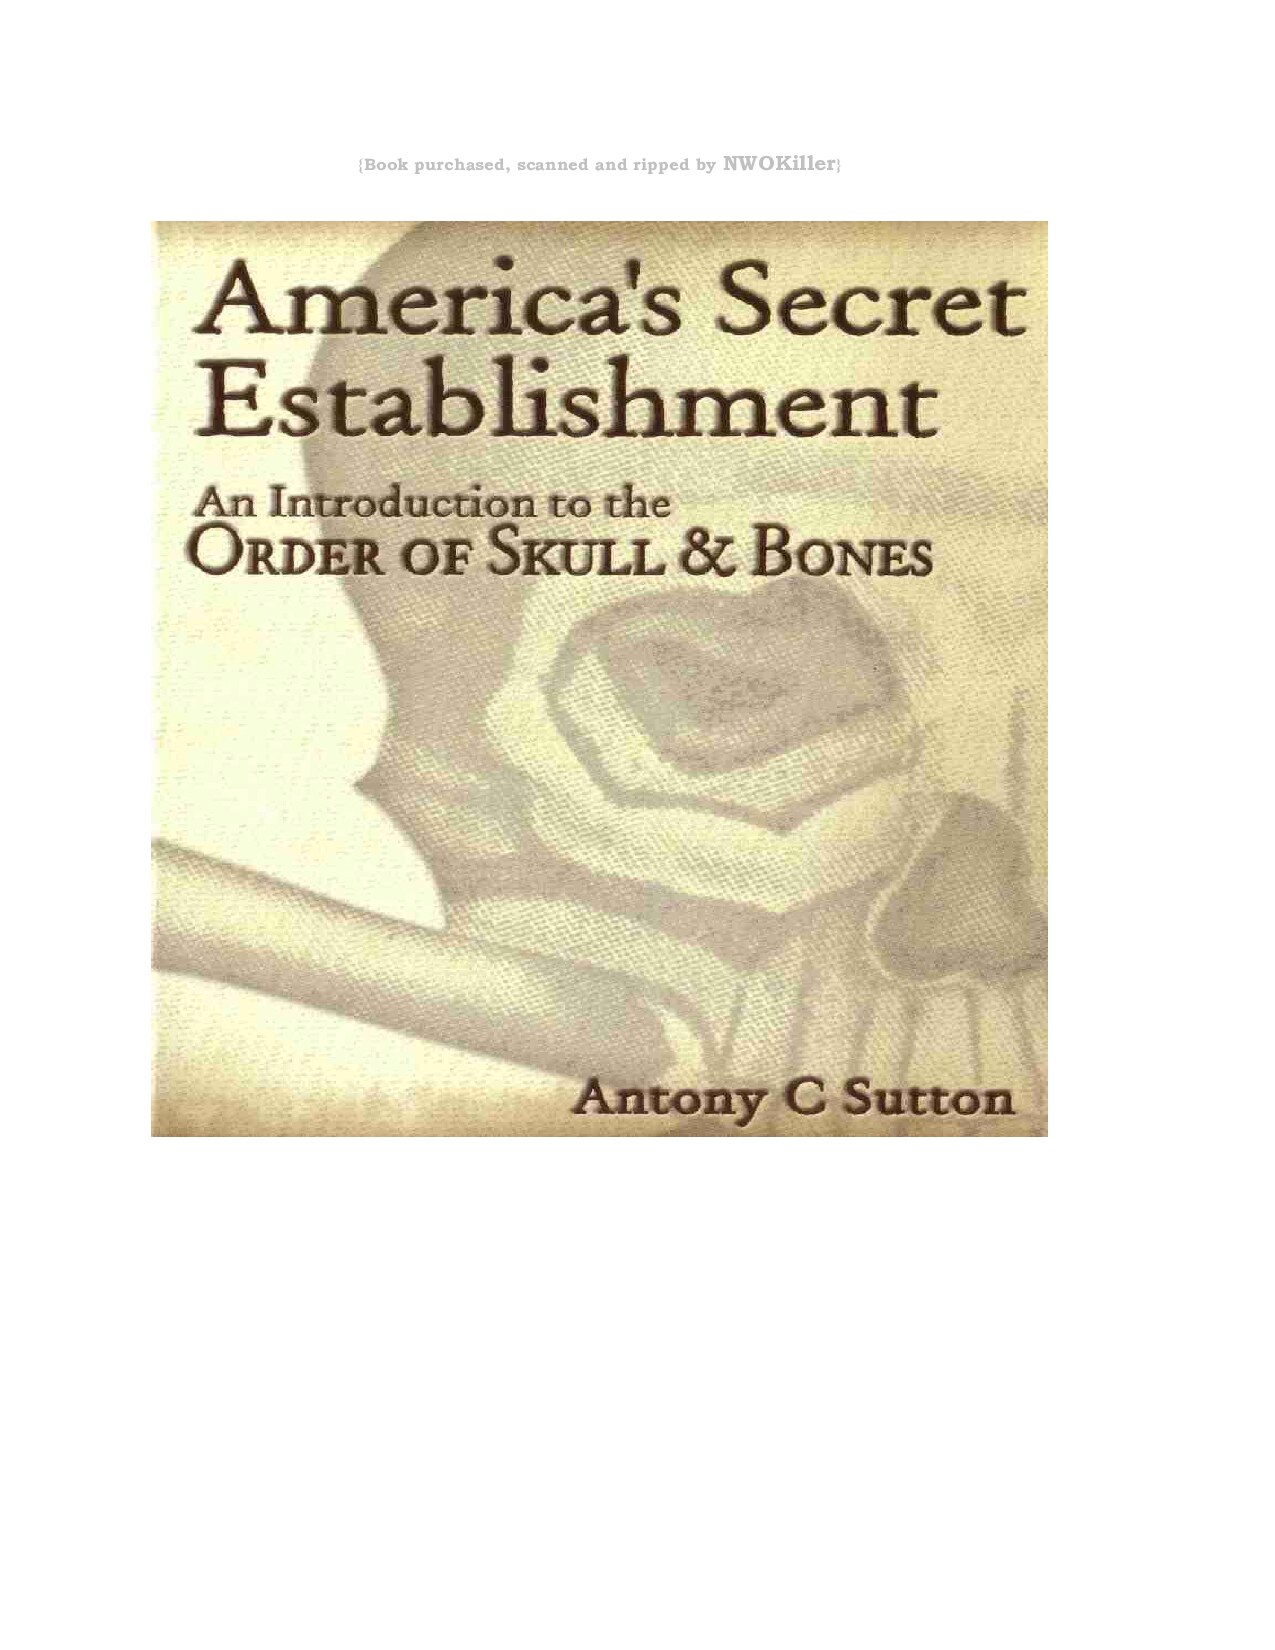 Sutton, Anthony Cyril; America's Secret Establishment An Introduction To Skull And Bones